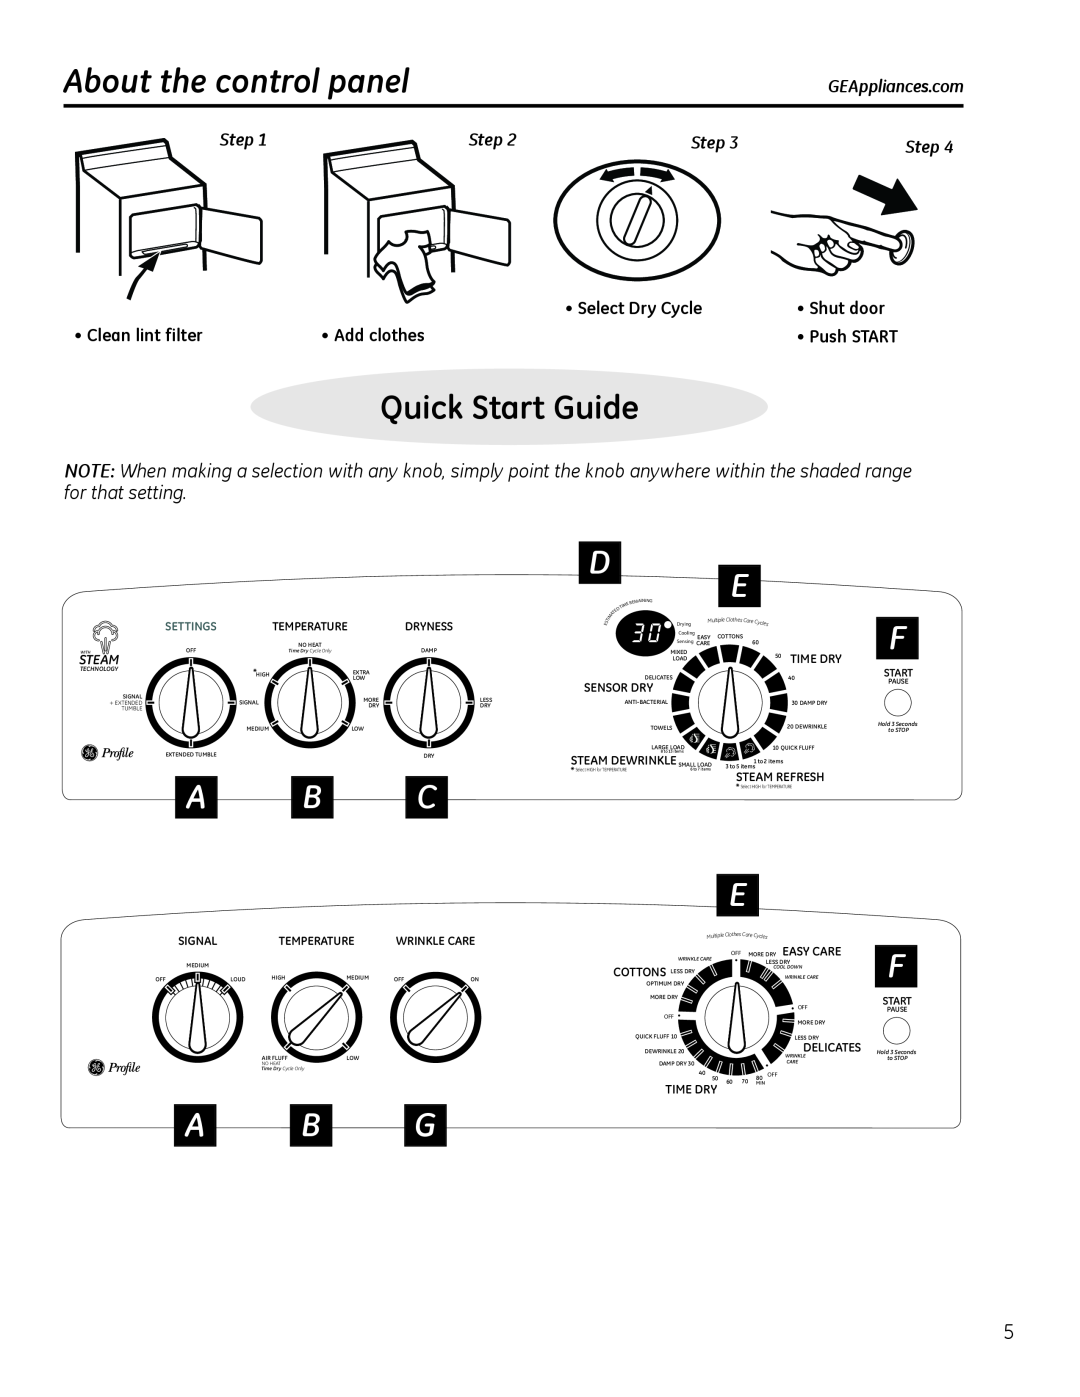 GE 234D1157P003 About the control panel, Quick Start Guide, GEAppliances.com, Steam, Settings, Temperature, Dryness, Pause 